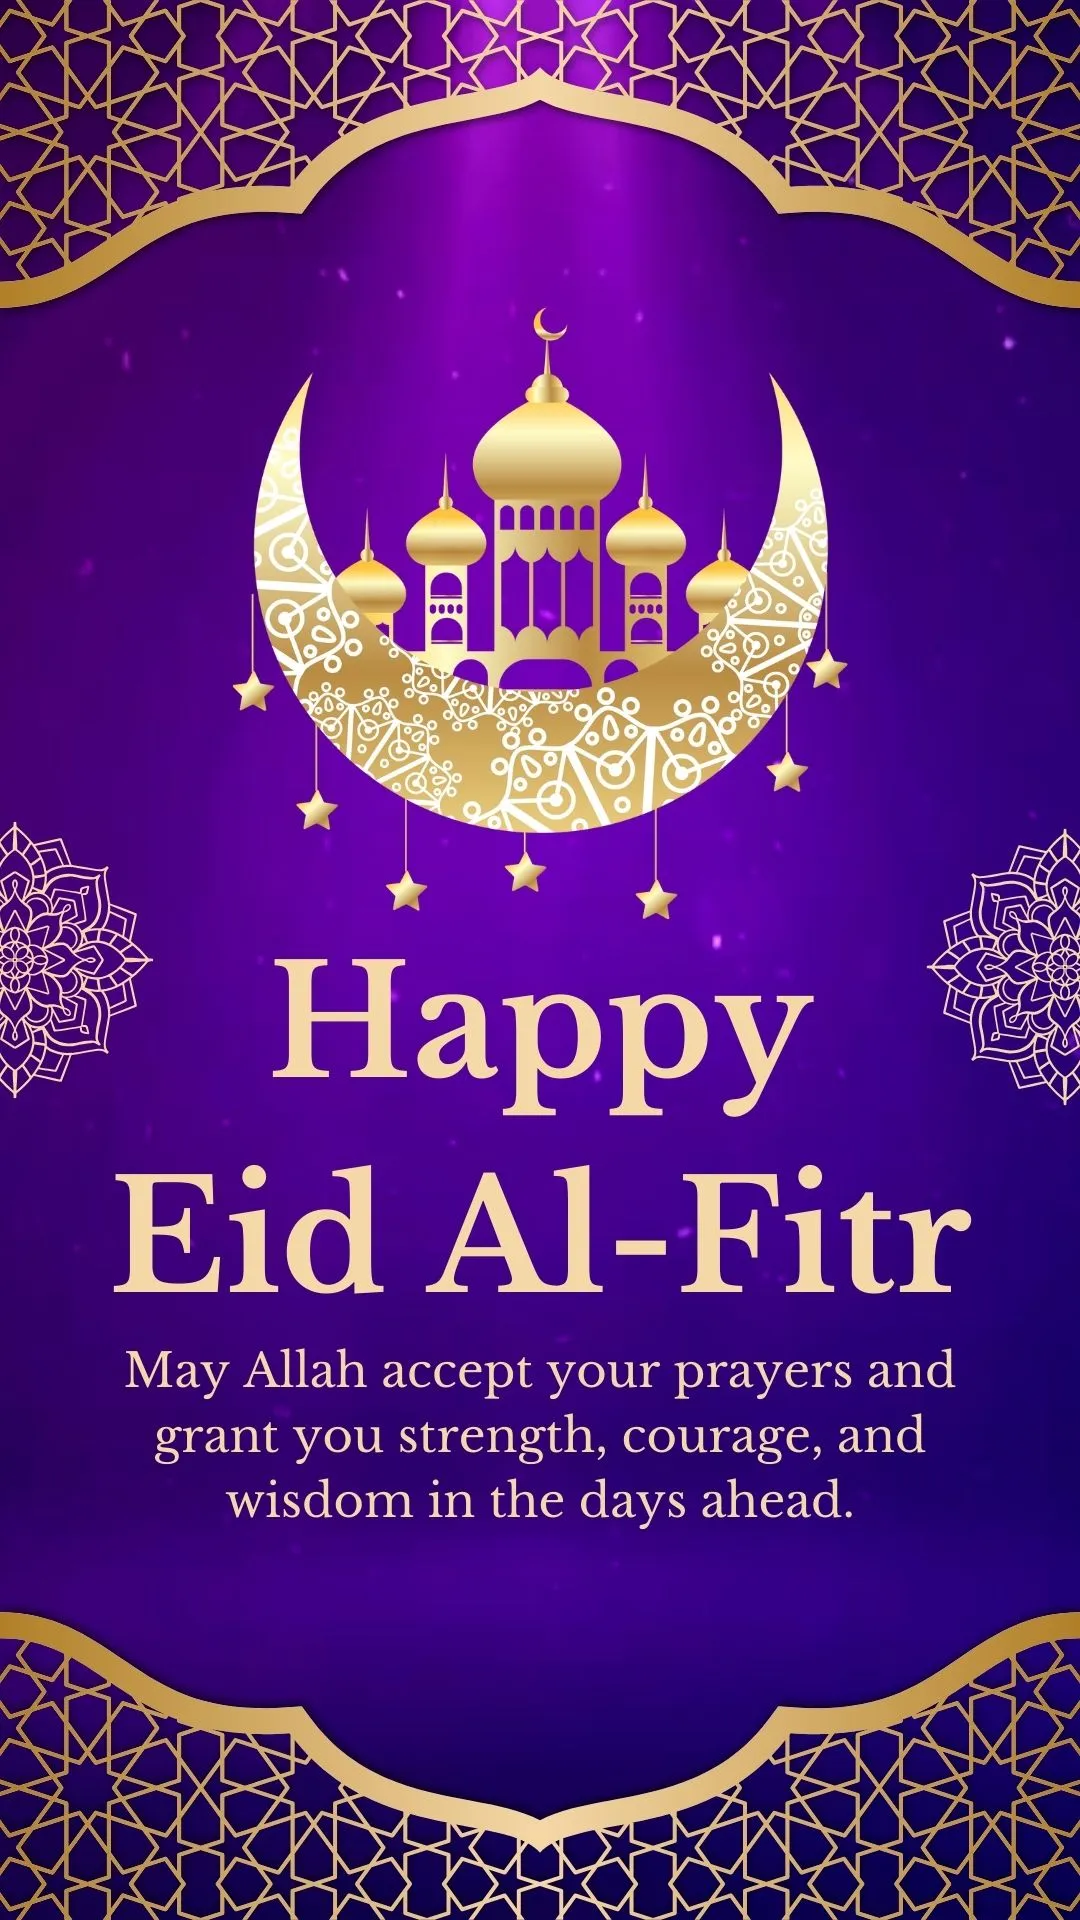 Eid-ul-fitr Wishes, Quotes, Messages, Greetings, WhatsApp Messages, WhatsApp Status